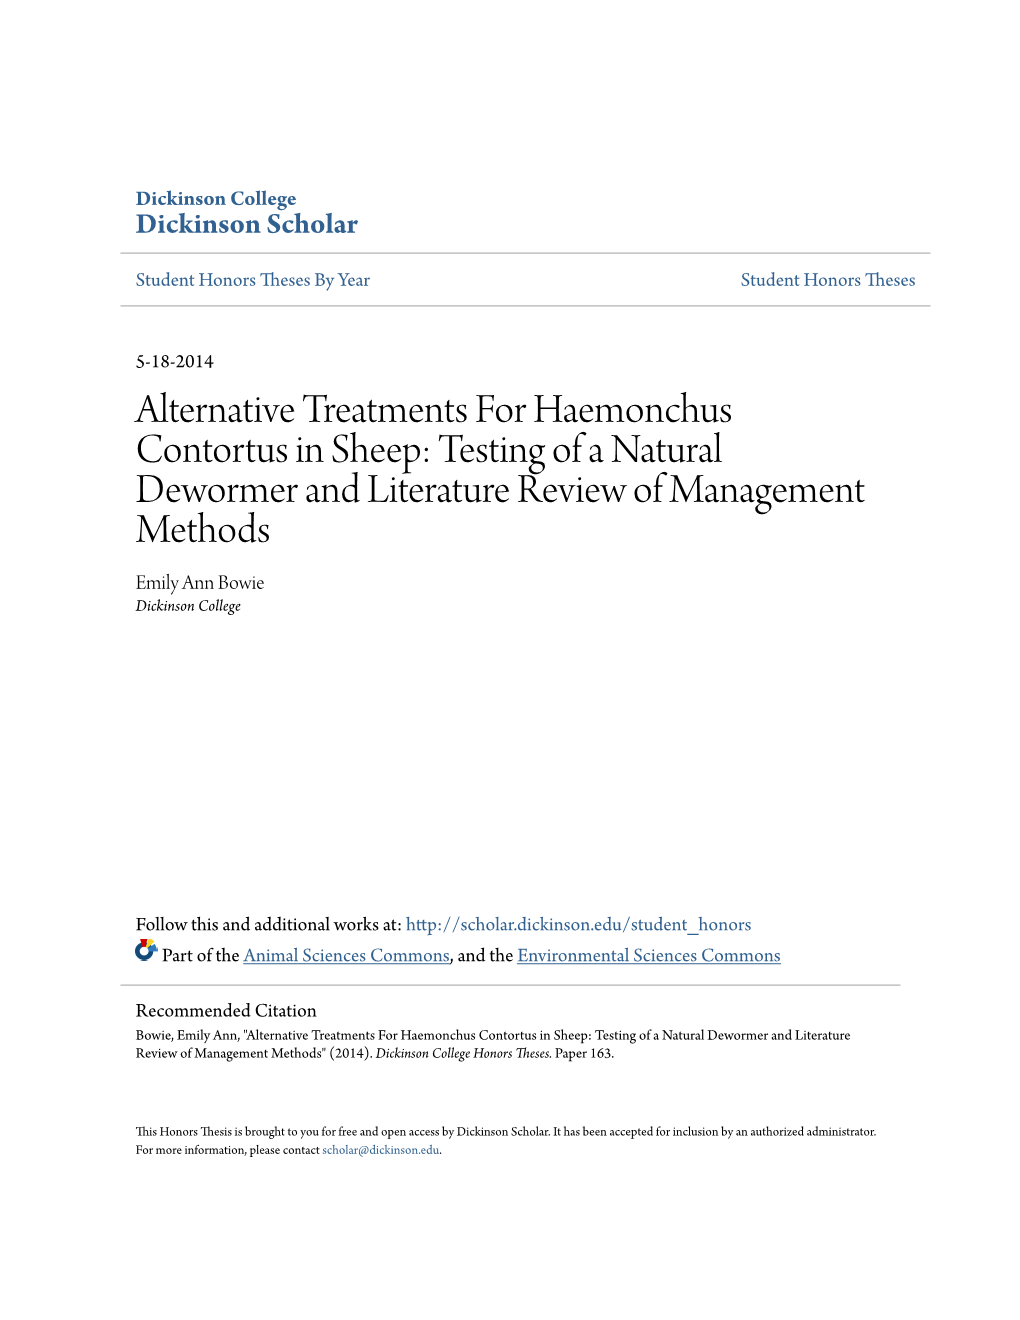 Alternative Treatments for Haemonchus Contortus in Sheep: Testing of a Natural Dewormer and Literature Review of Management Methods Emily Ann Bowie Dickinson College